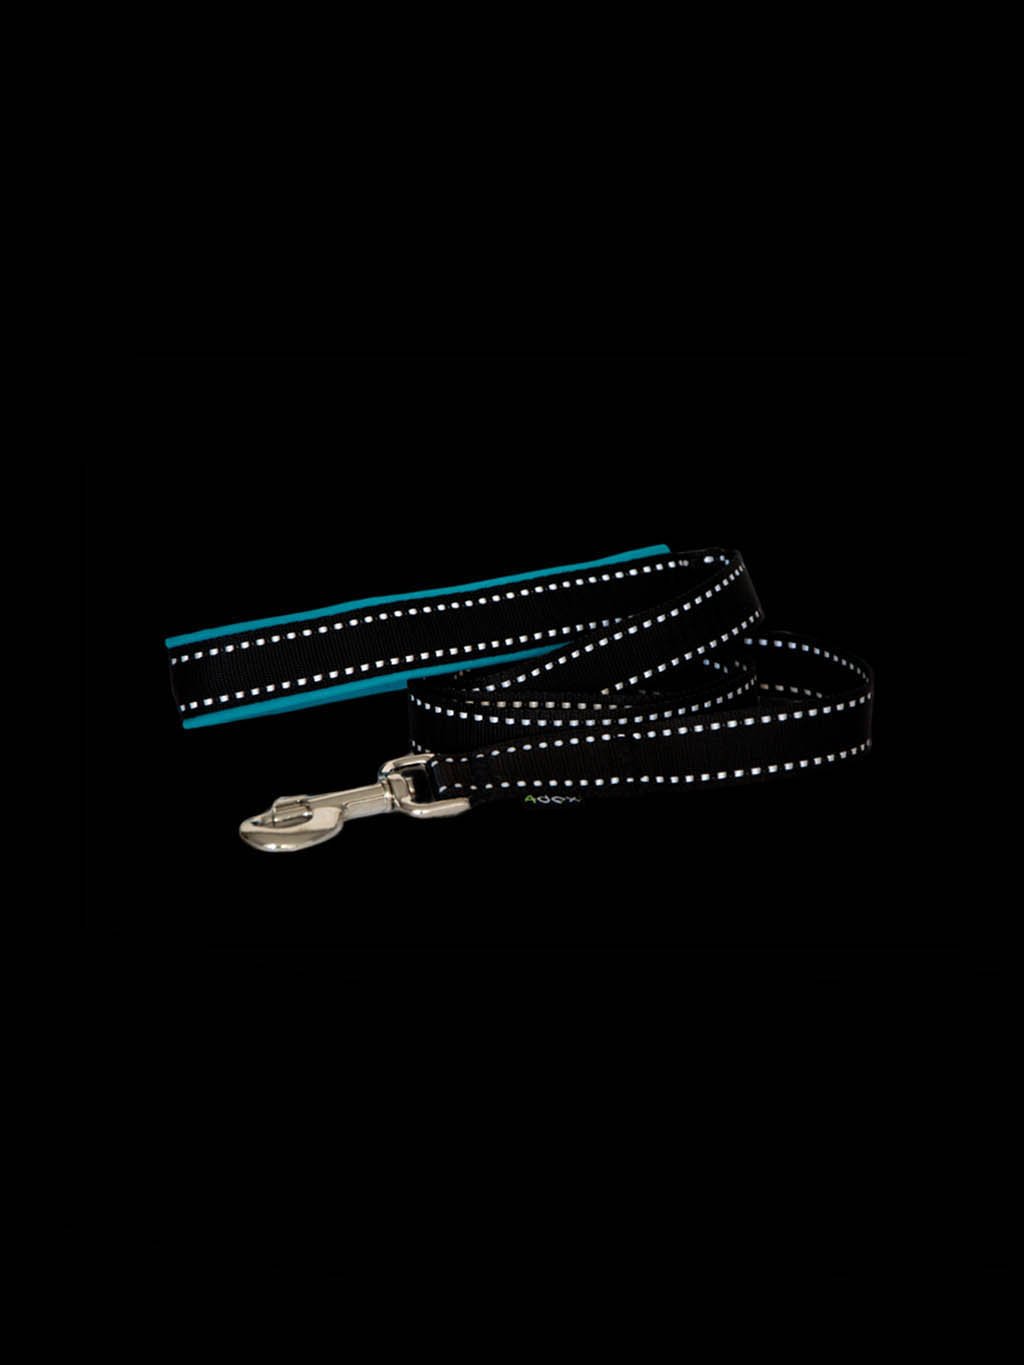 Leash with a reflective tape, TURQUOISE